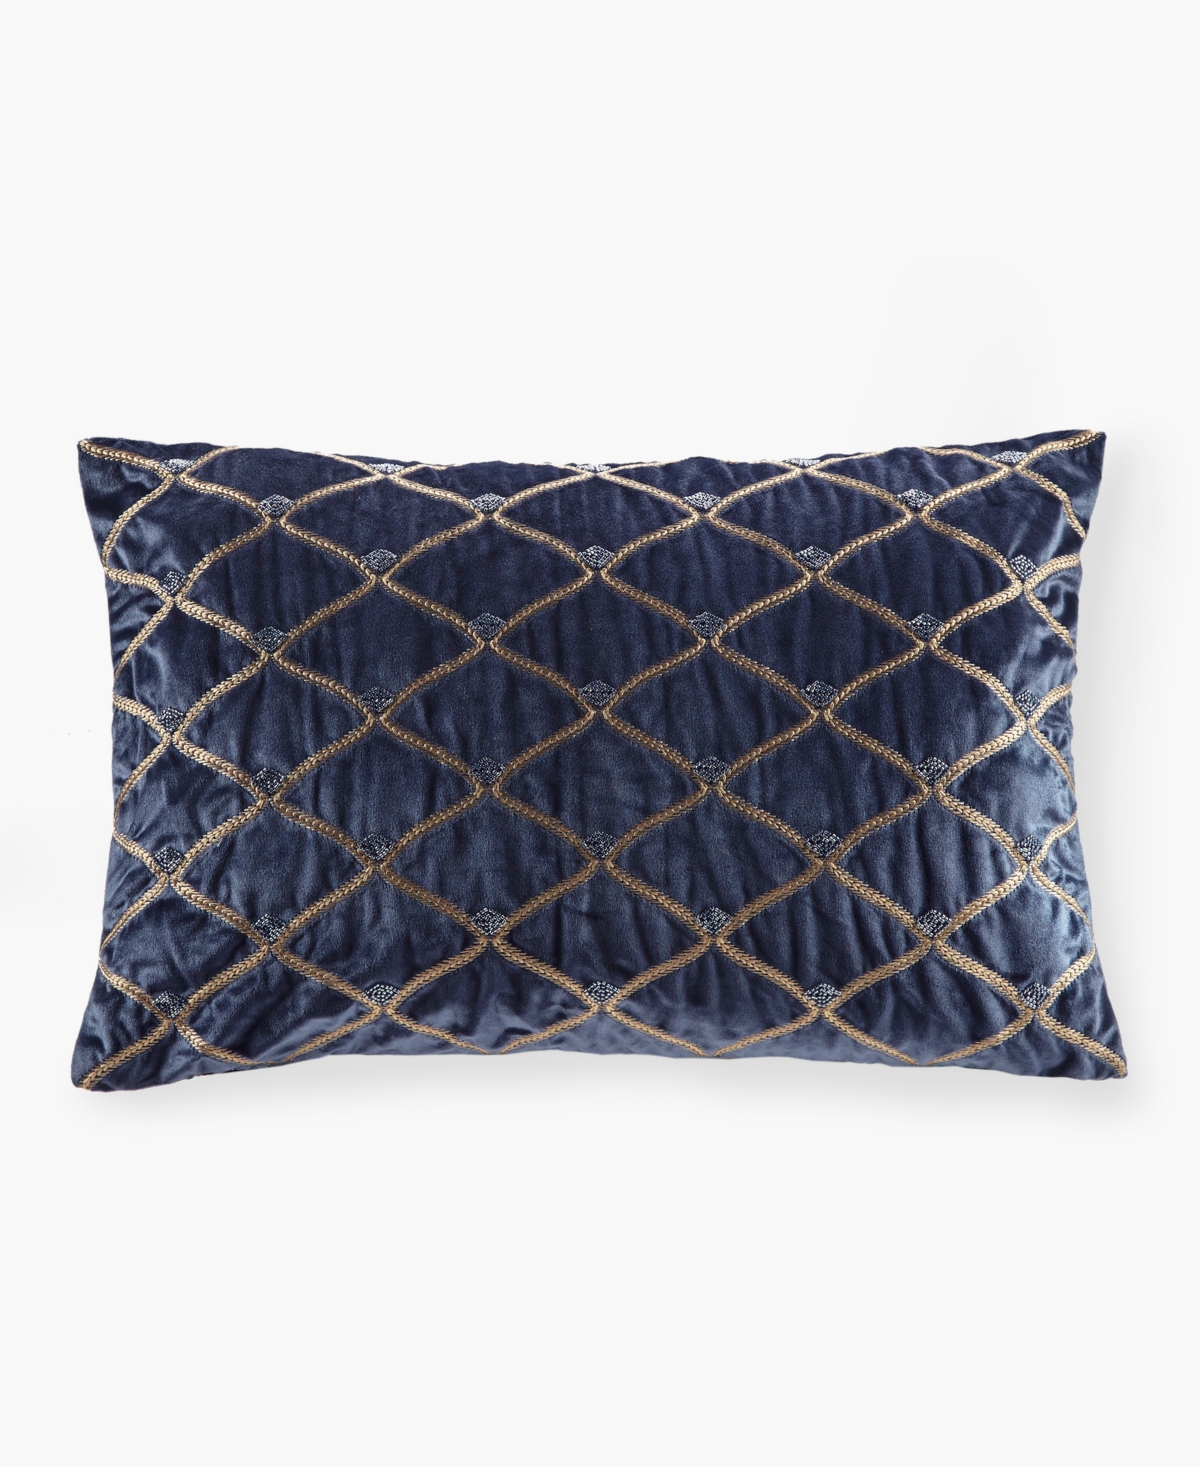 Croscill Aumont Oblong Decorative Pillow, 22" X 15" In Navy